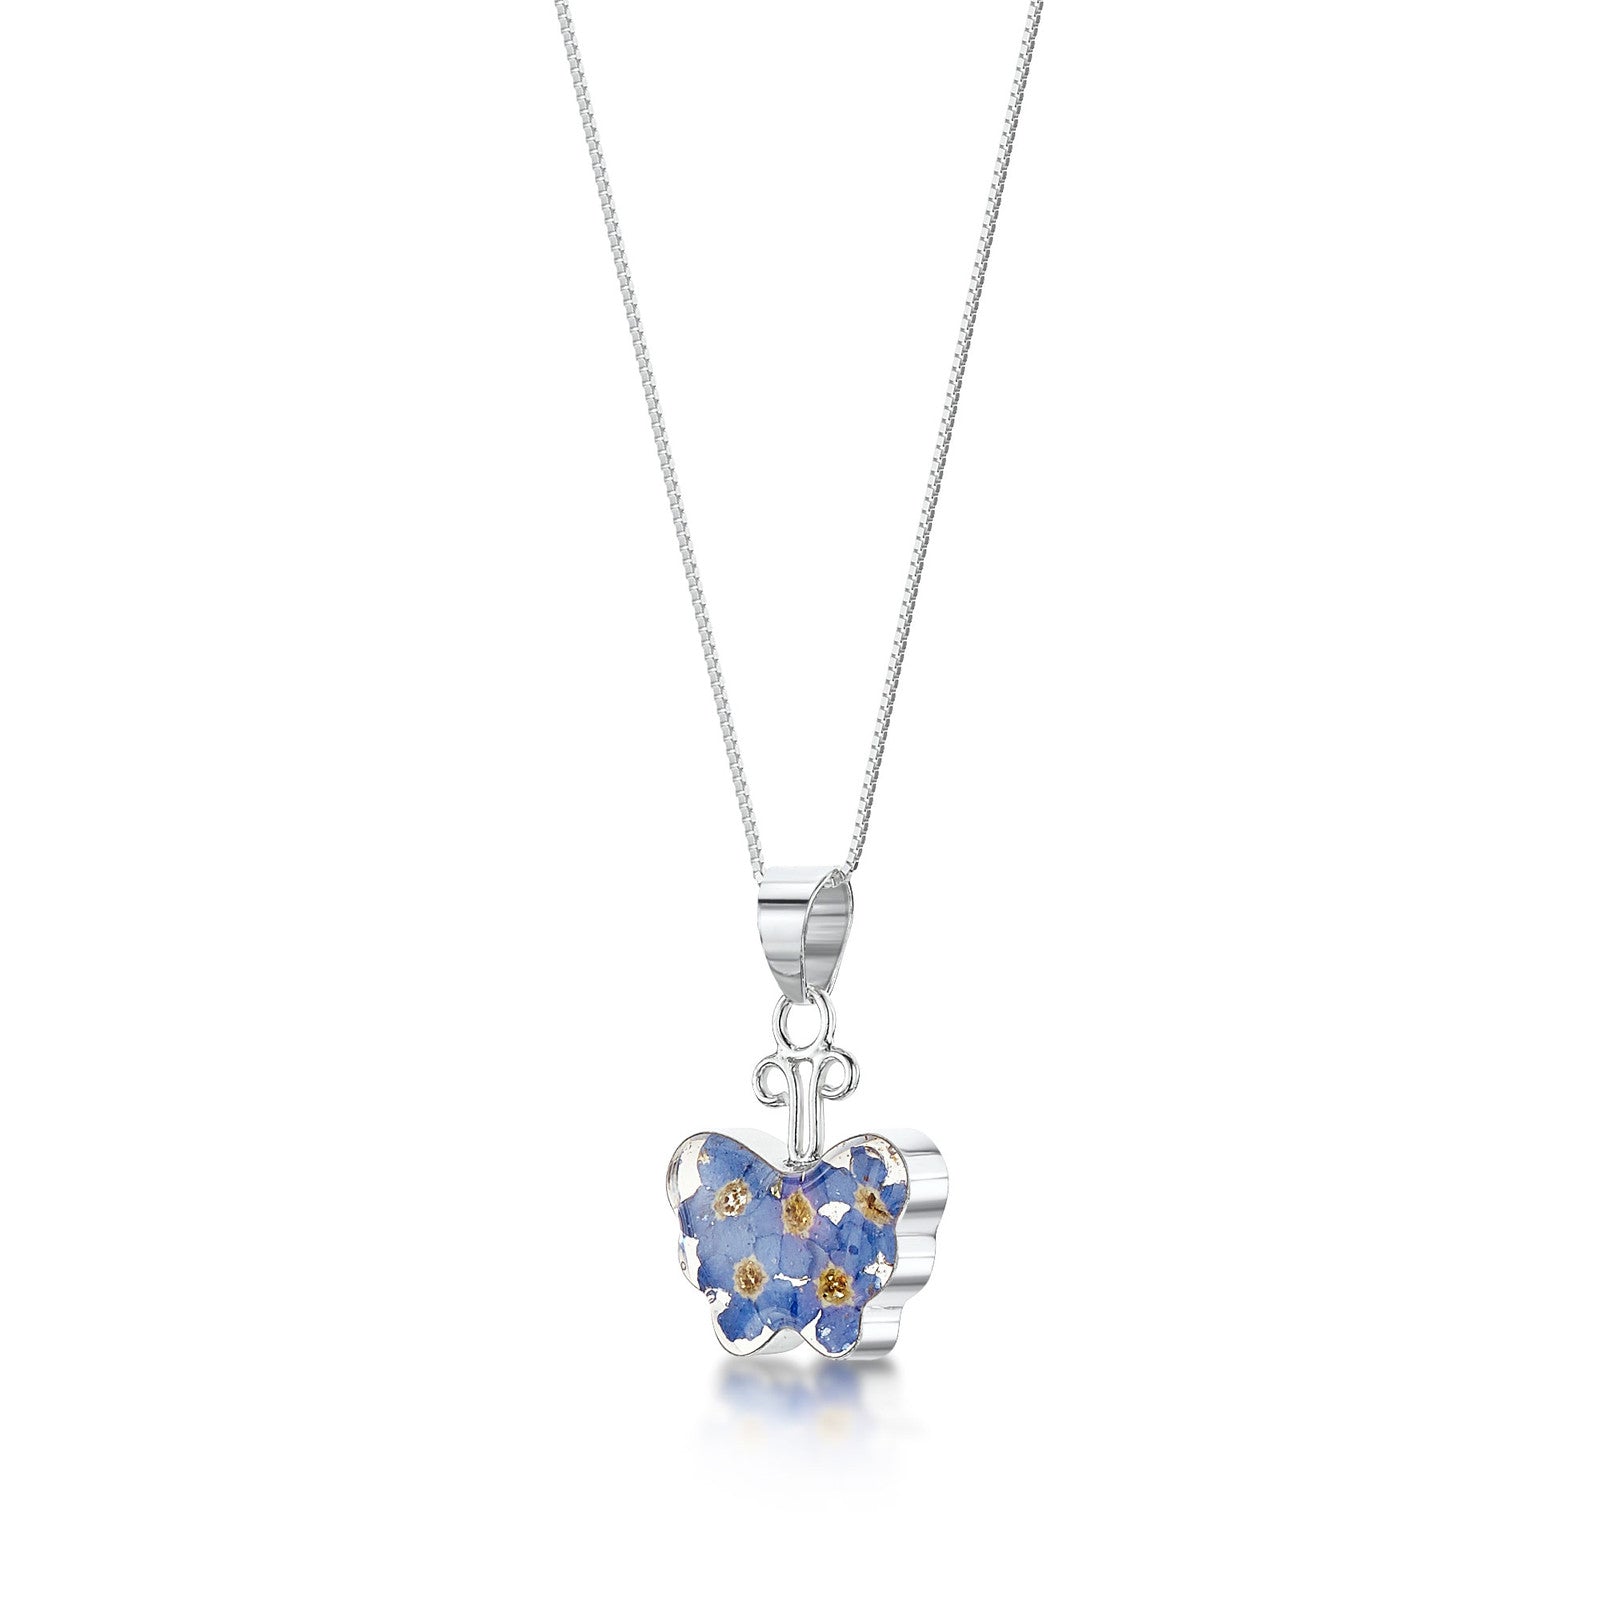 Silver Necklace - Forget-me-not - Small Butterfly